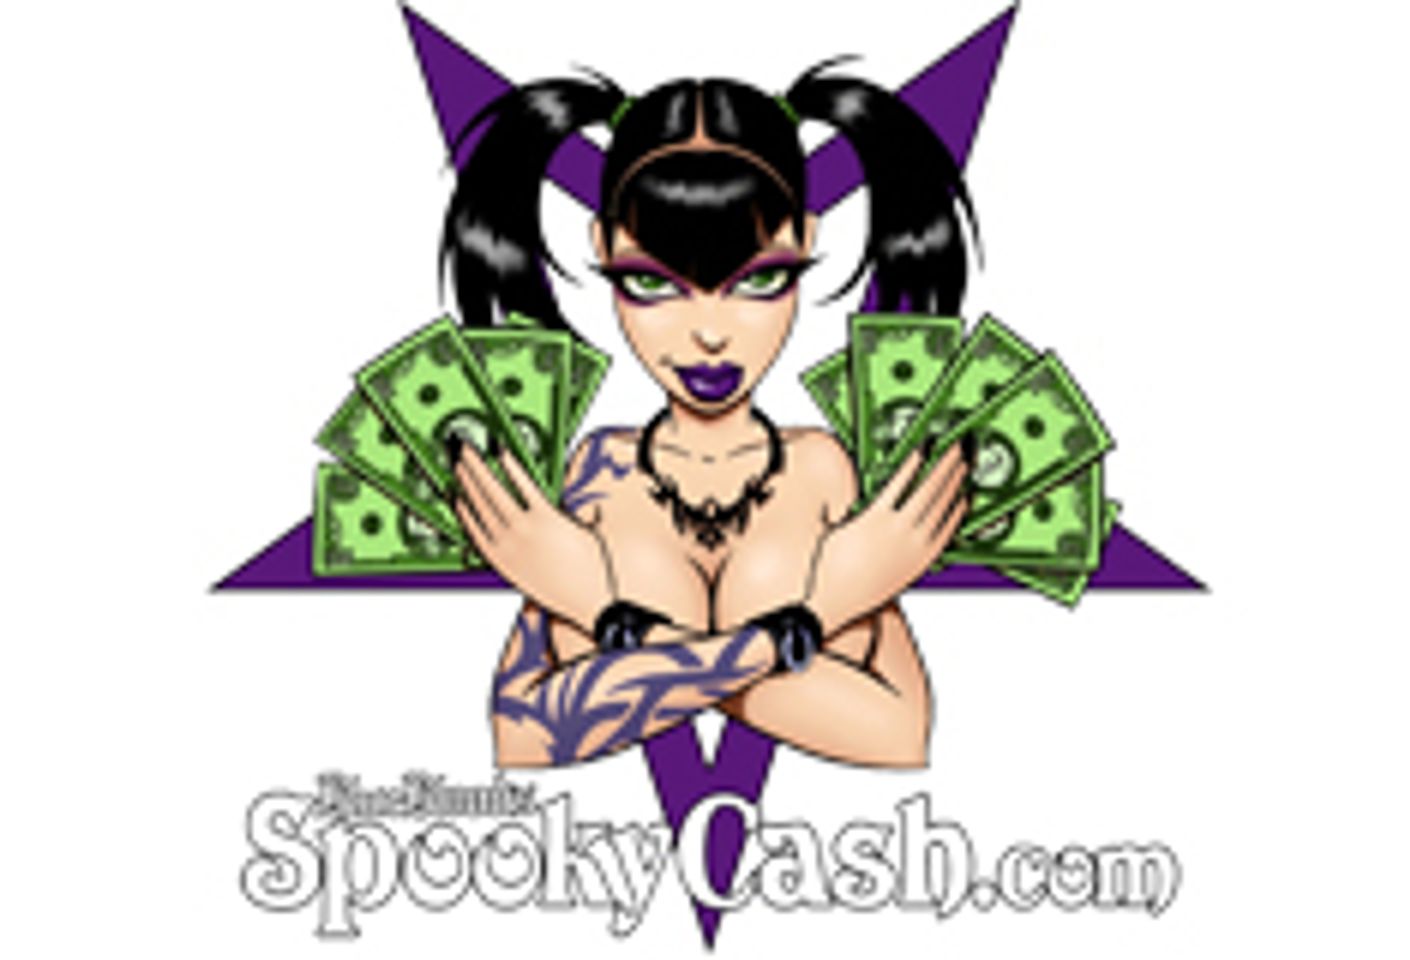 SpookyCash 2.0 Launches with CCBill Option and Sales Tool Upgrades